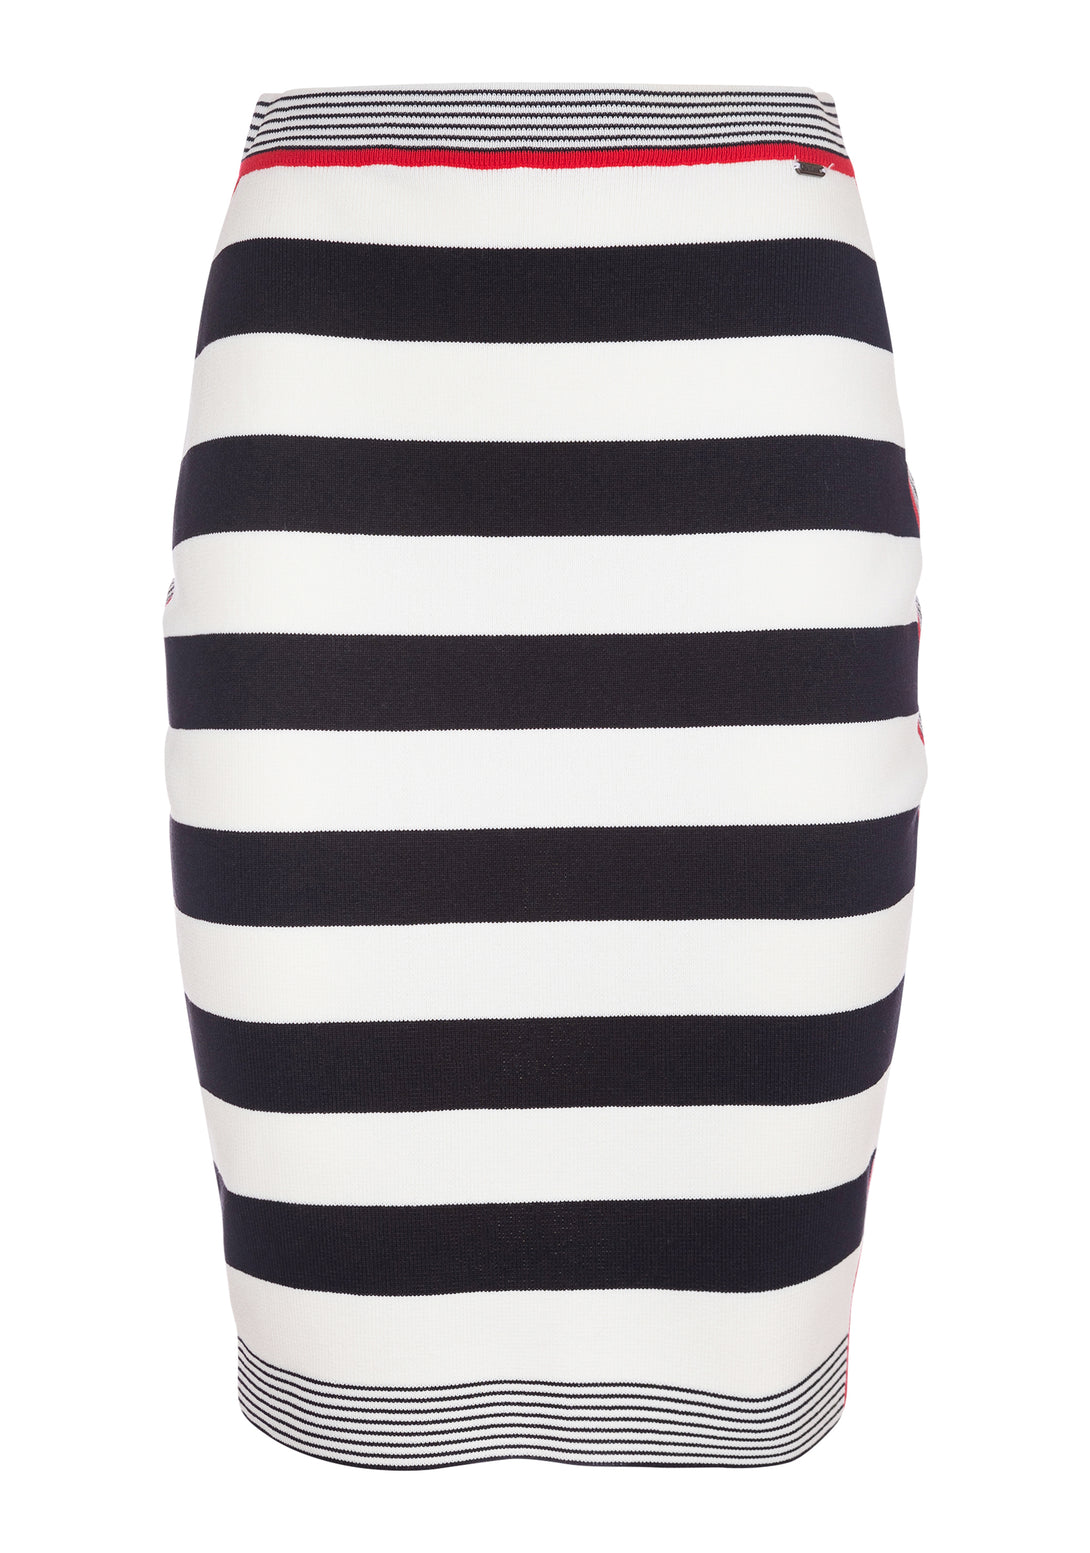 Knitted skirt slim fit, middle length, with stripes